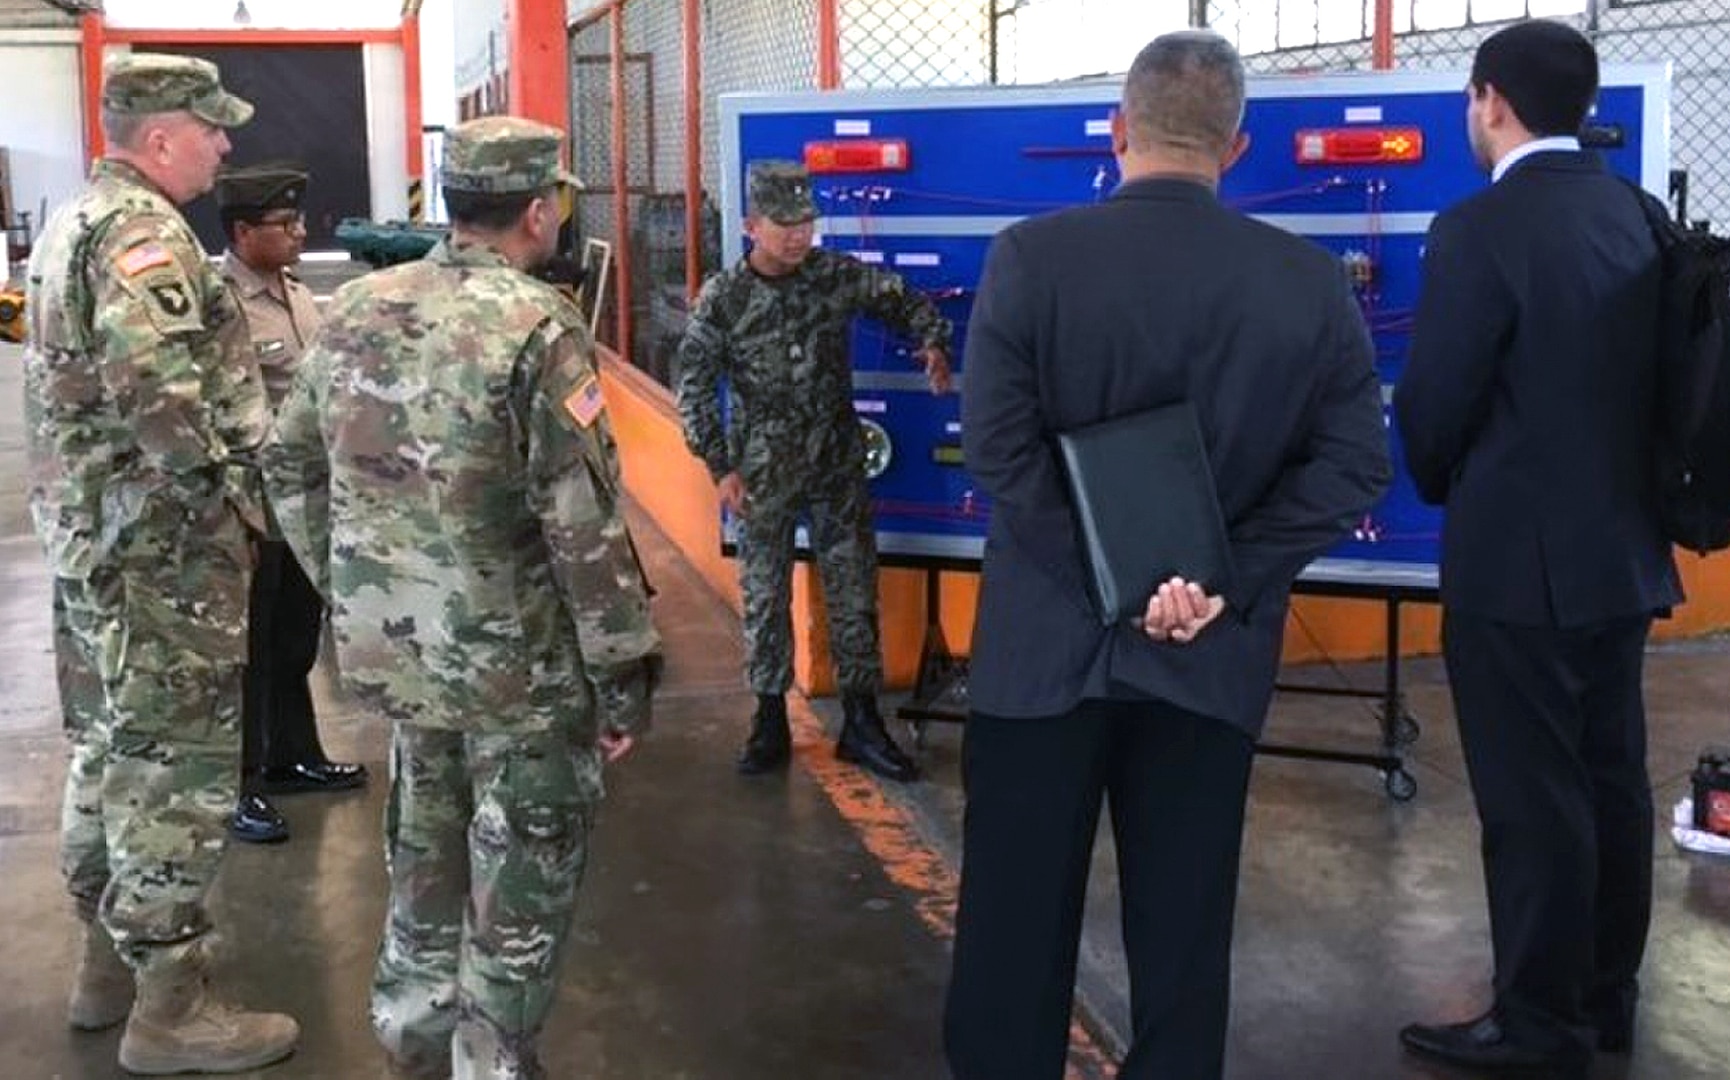 Combined Arms Support Command and Army South members receive a tour of Peruvian Army maintenance facilities on a recent visit to Peru. Six CASCOM and ARSOUTH members visited the Peruvian Army to assist in modernizing their logistics doctrine and programs to better support future operational requirements.